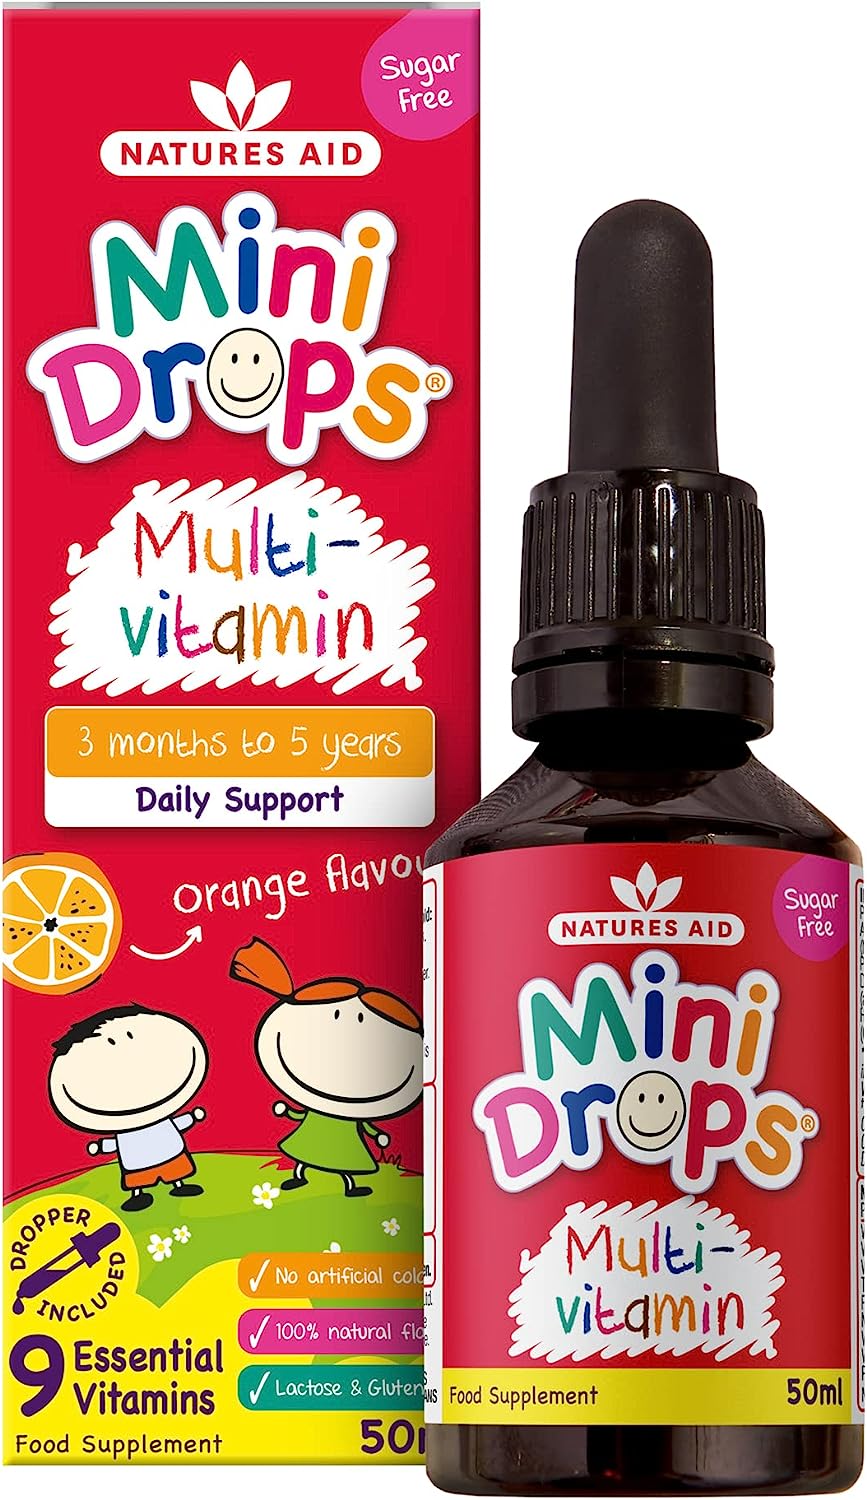 Natures Aid Mini Drops Multi-vitamin Orange Flavour for Infants and Children Sugar Free 50ml RRP 8 CLEARANCE XL 6.99